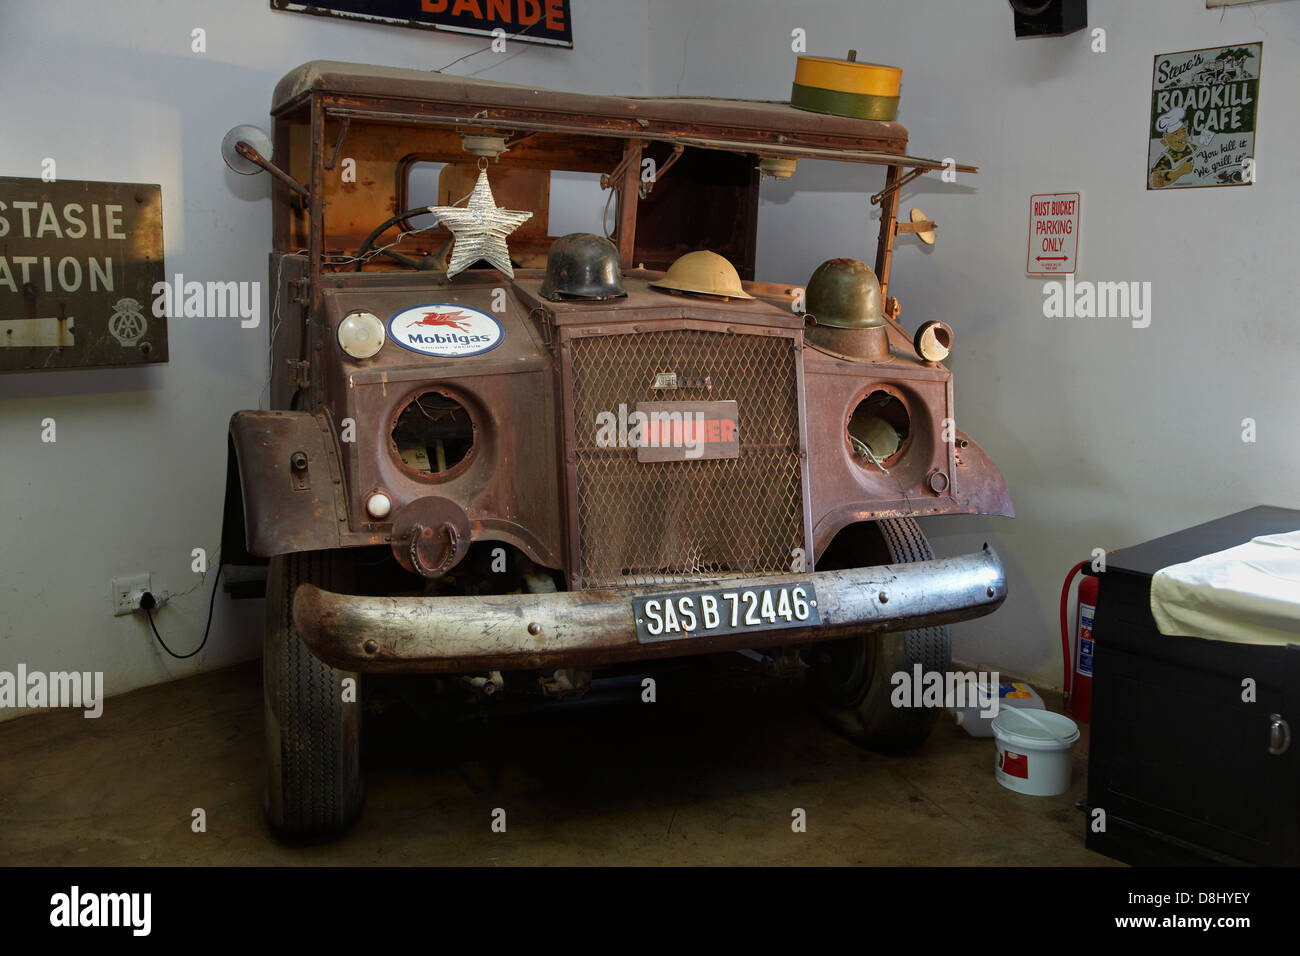 Vintage truck, Canon Roadhouse restaurant, near Fish River Canyon, Southern Namibia, Africa Stock Photo